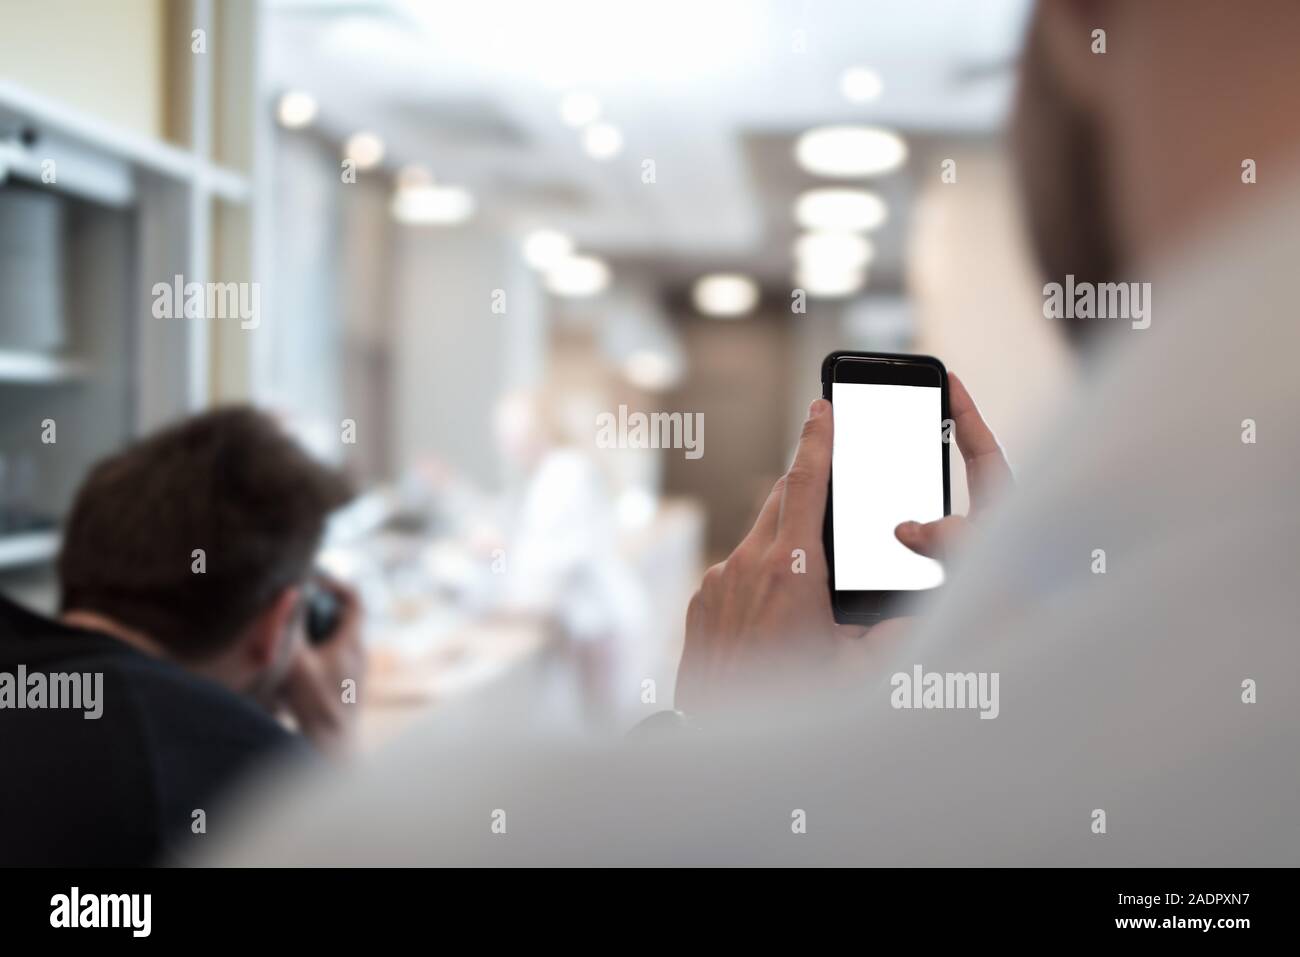 Businessman holding mobile phone in his hand trying to make a picture. Isolated cellphone screen. Stock Photo